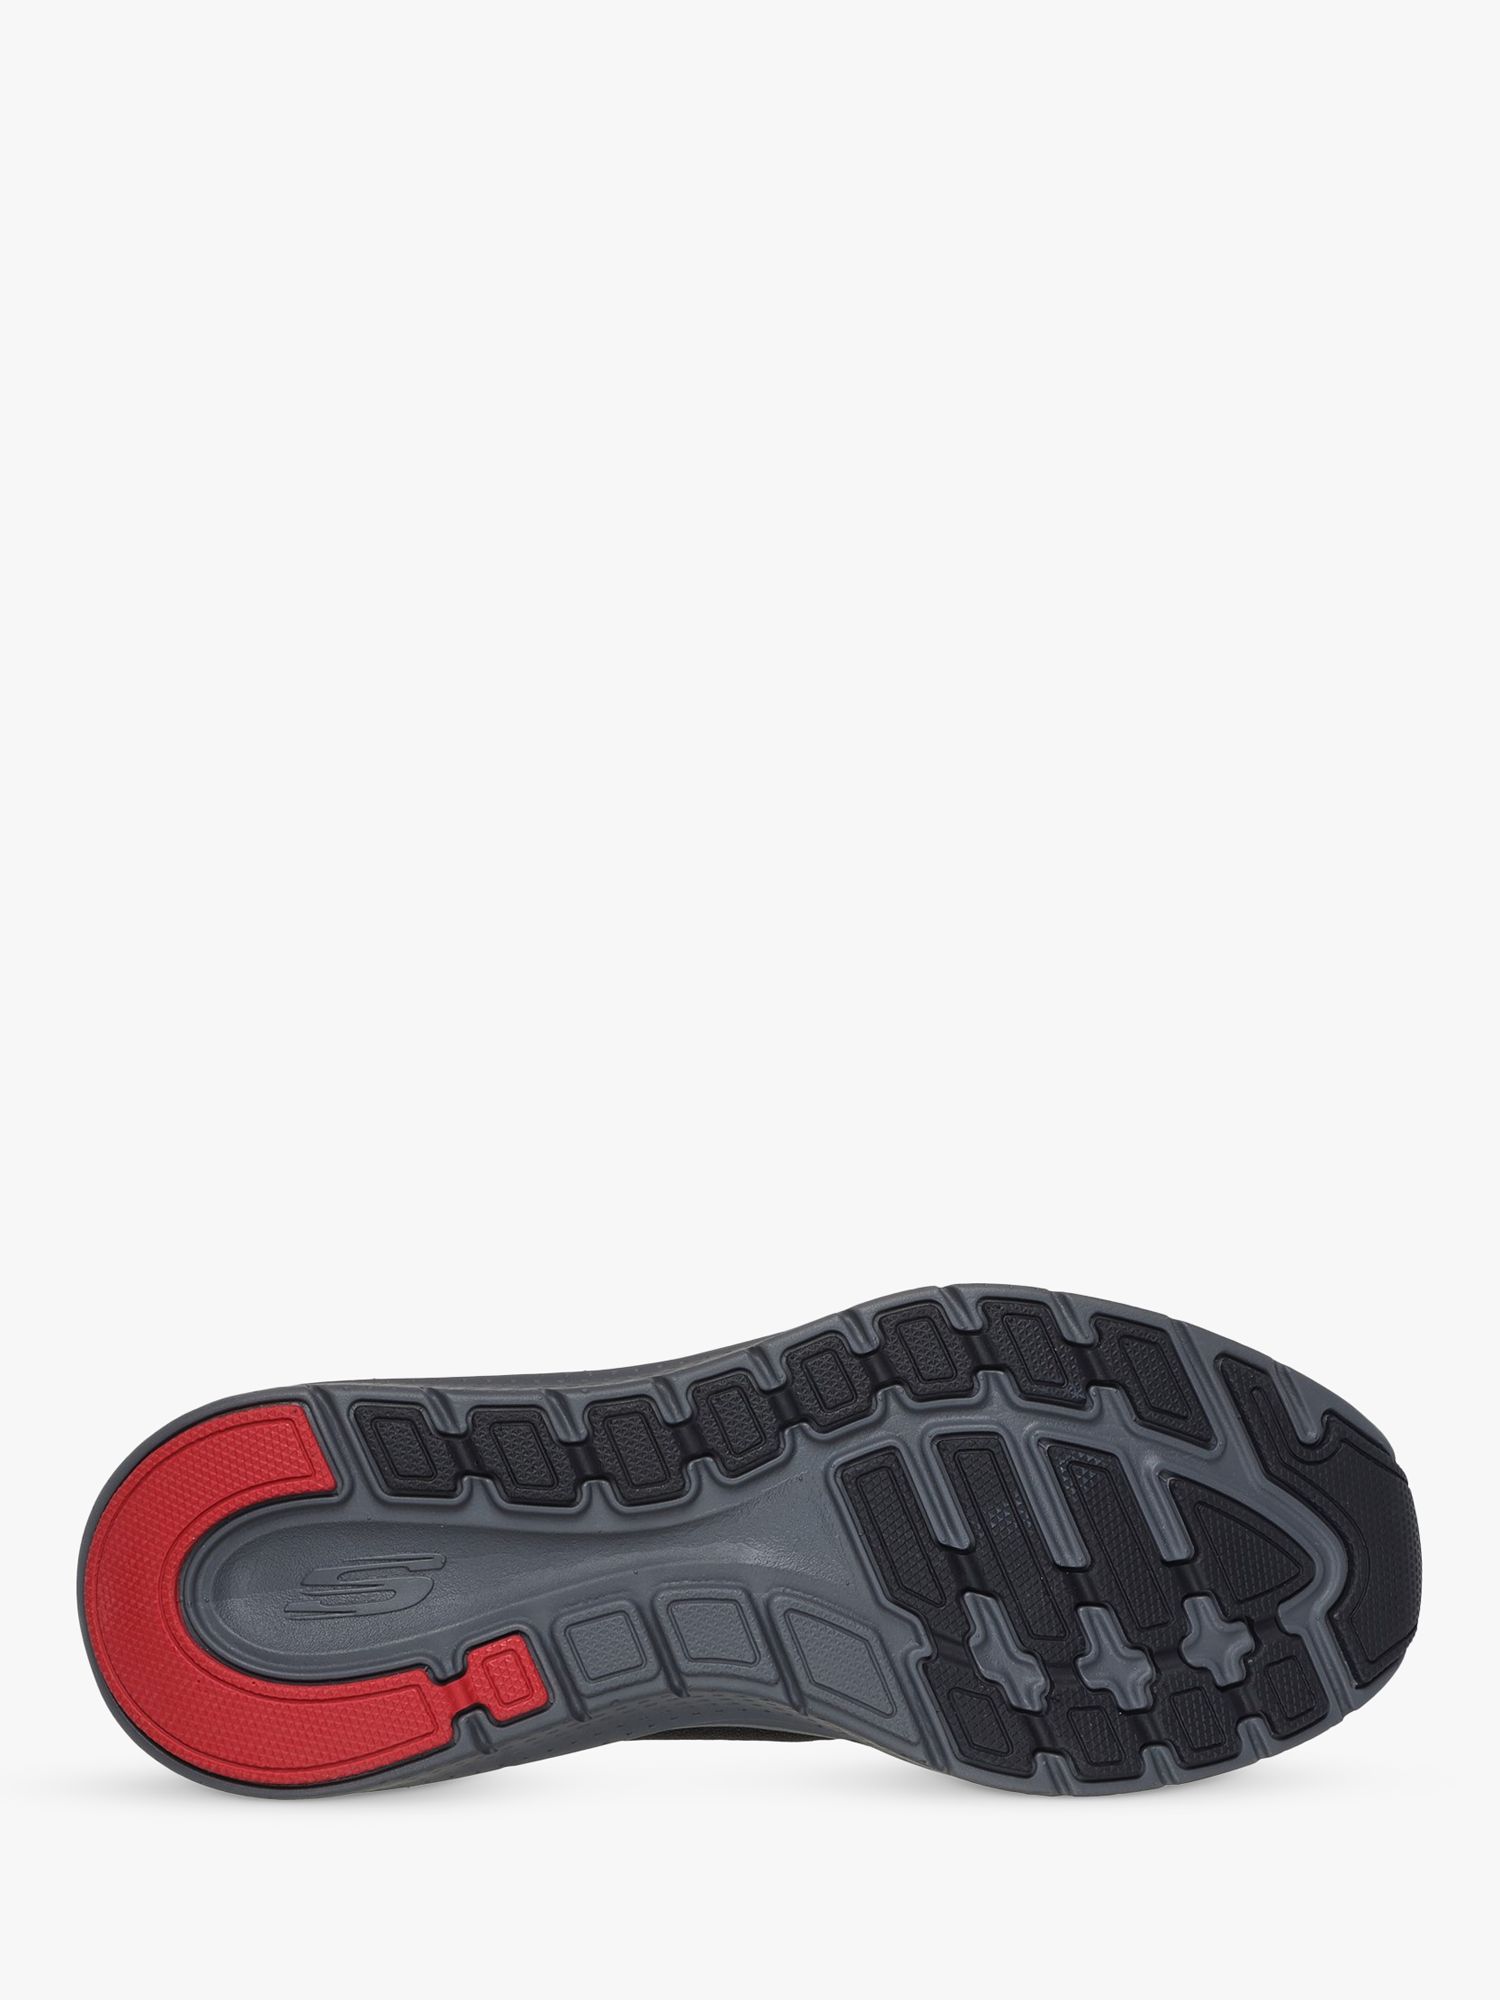 Buy Skechers Arch Fit 2.0 Trainers, Black/Red Online at johnlewis.com